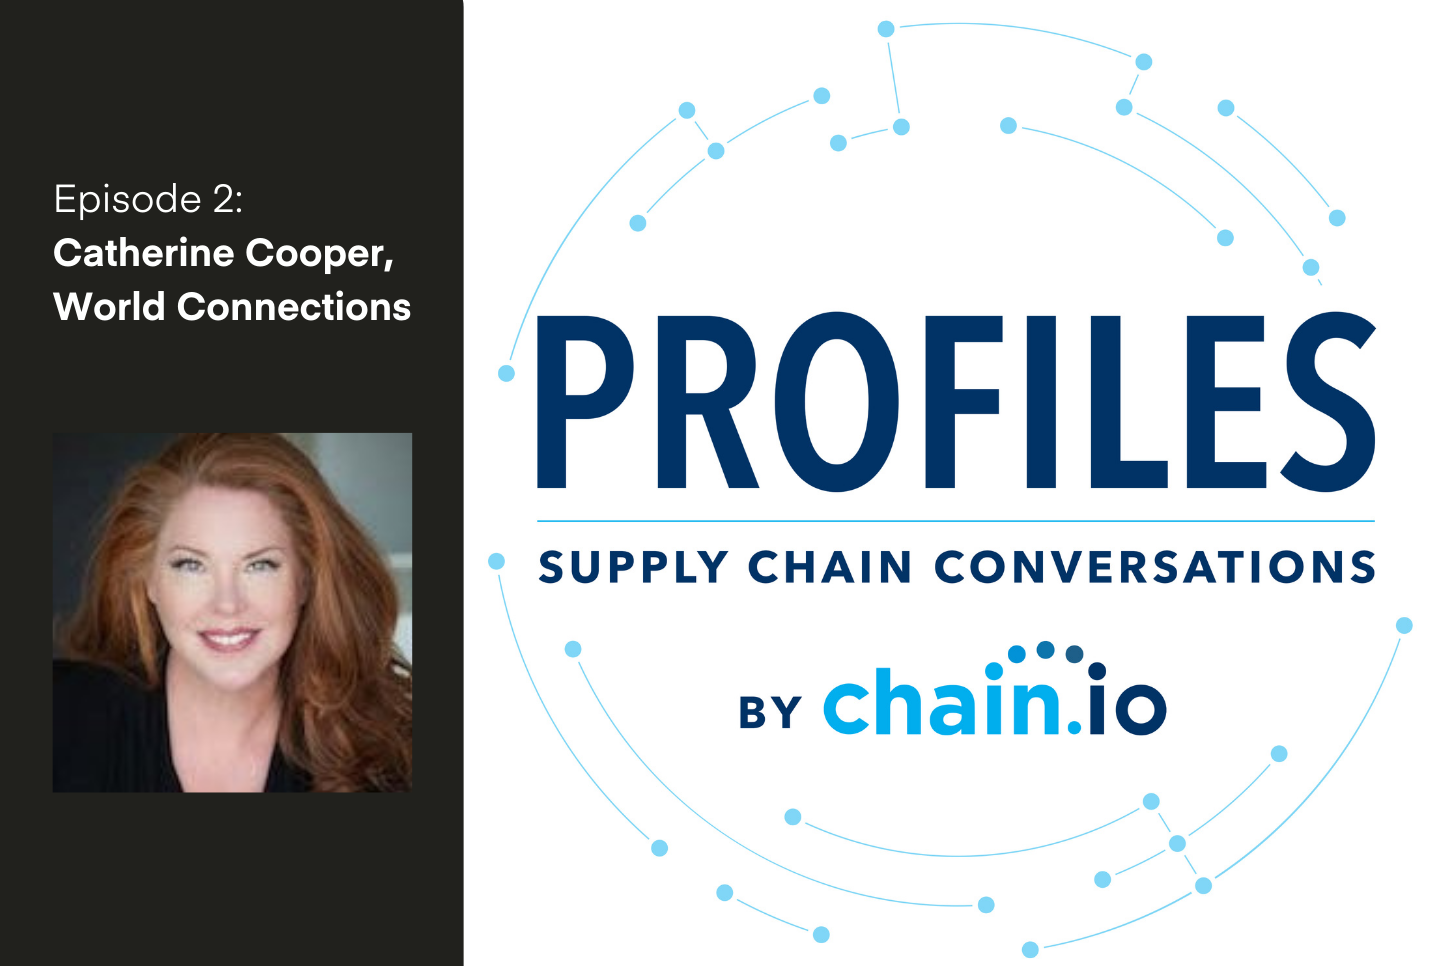 Catherine Cooper, founder of World Connections, joins Brian Glick, CEO of Chain.io